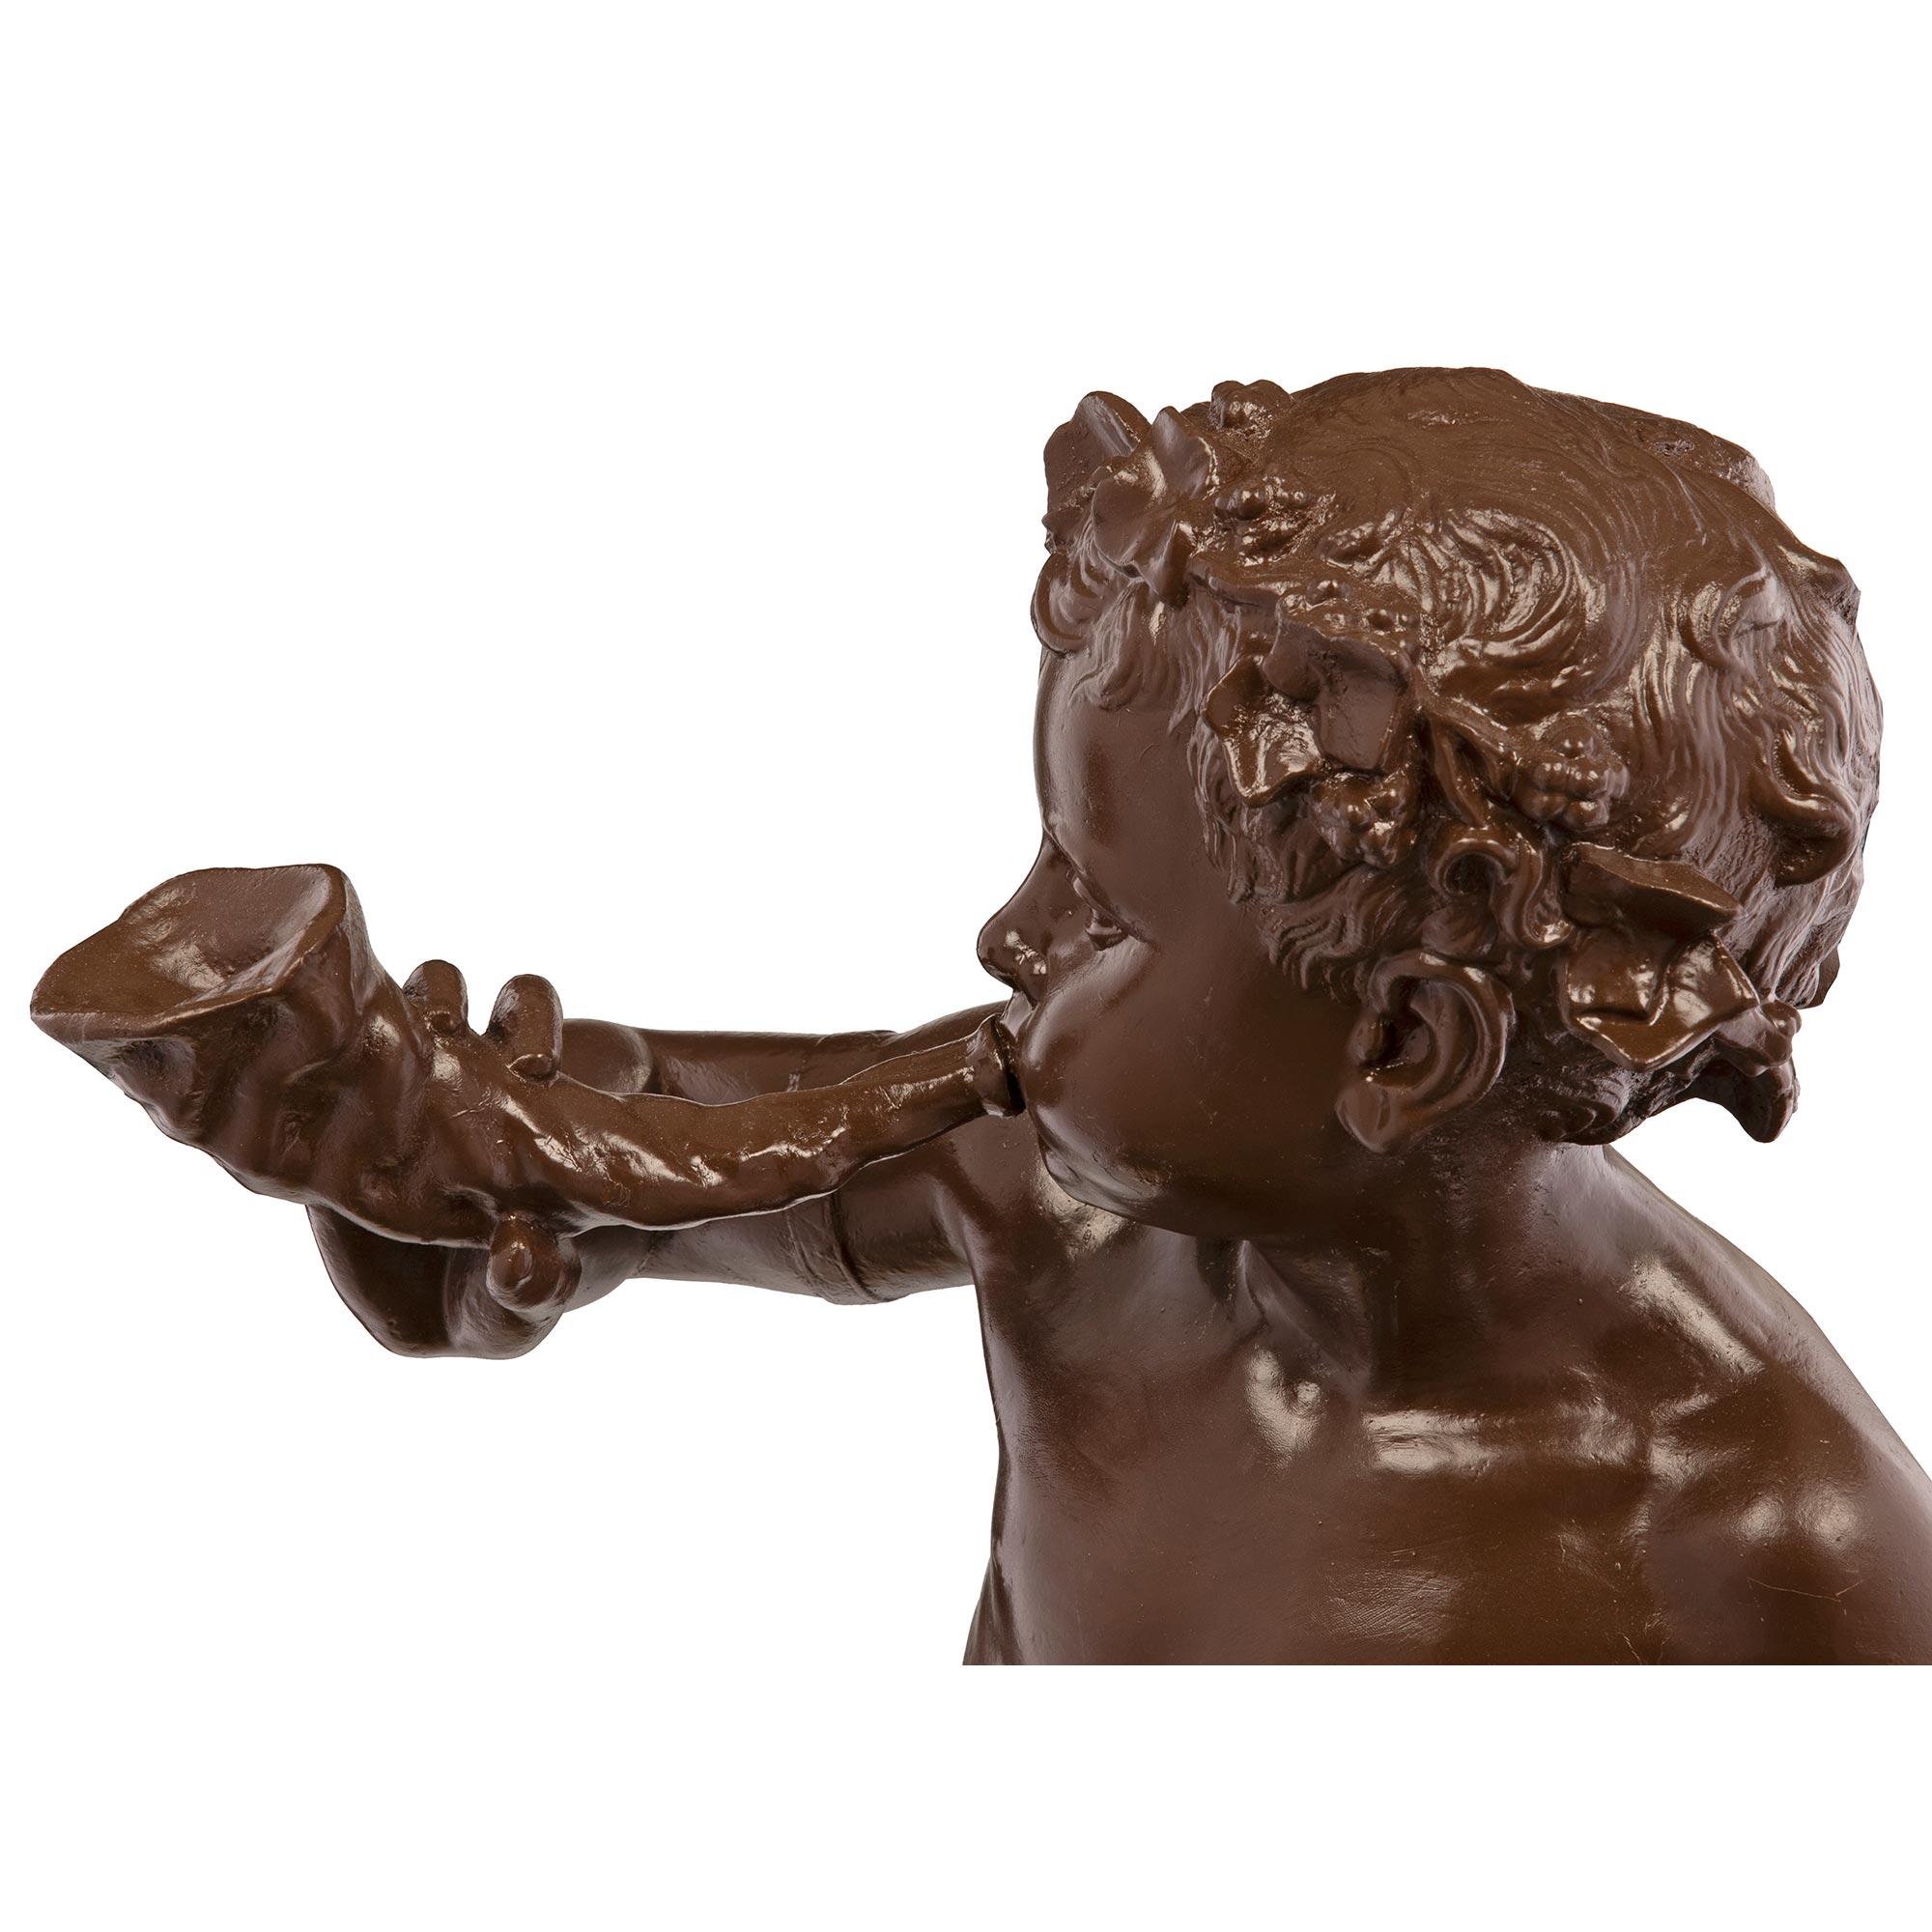 French 19th Century Cast Iron Statue of a Young Boy, Signed ‘A. DURENNE, Paris’ For Sale 3